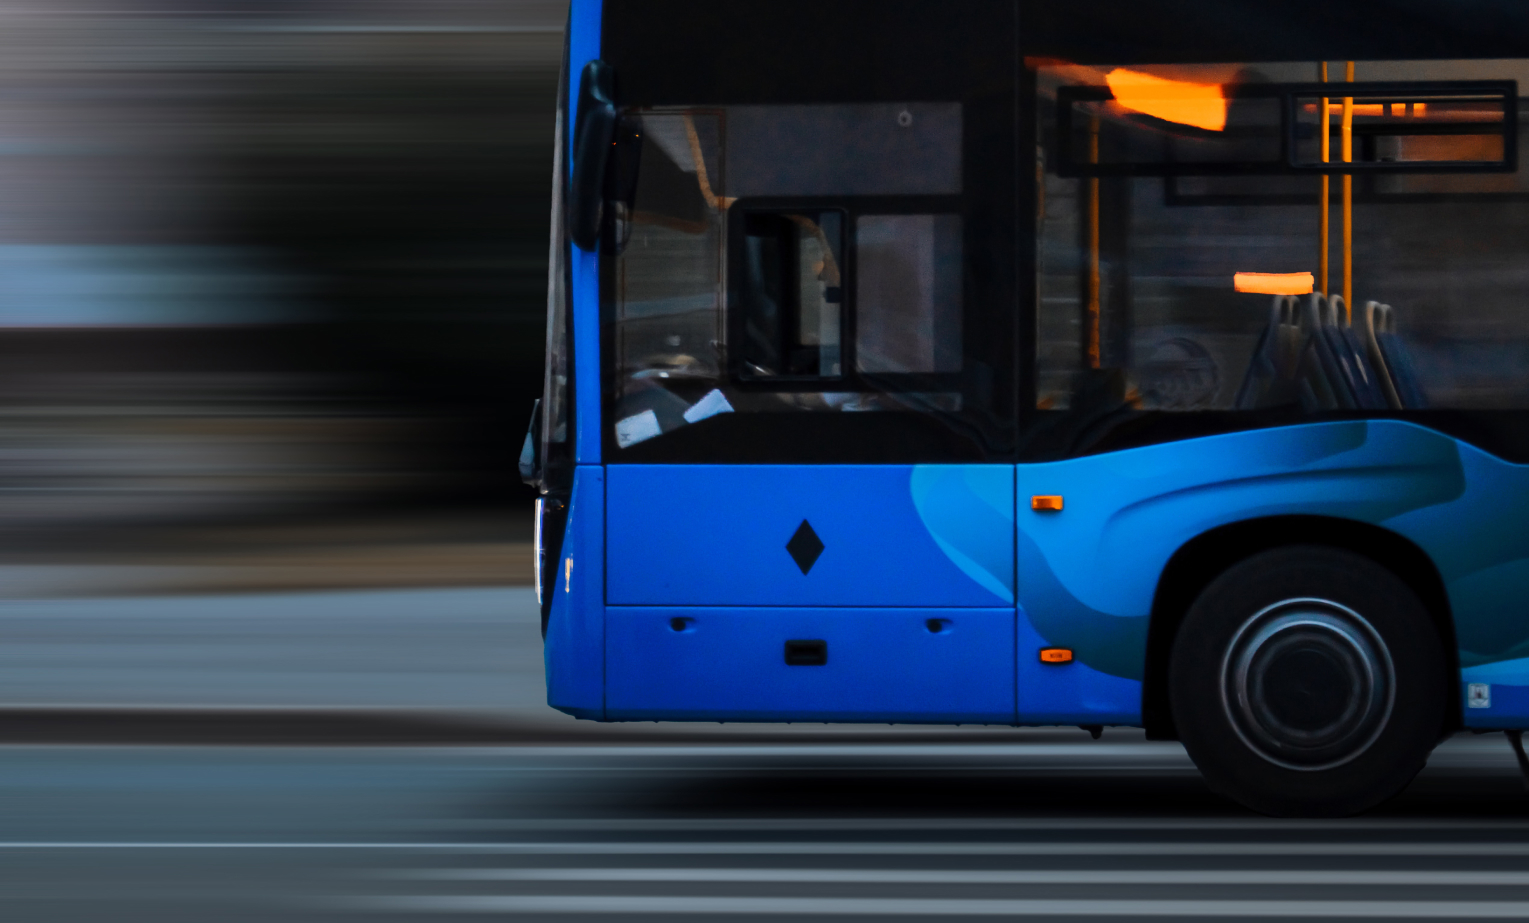 Image of a blue bus photographed from the side with a blurry background